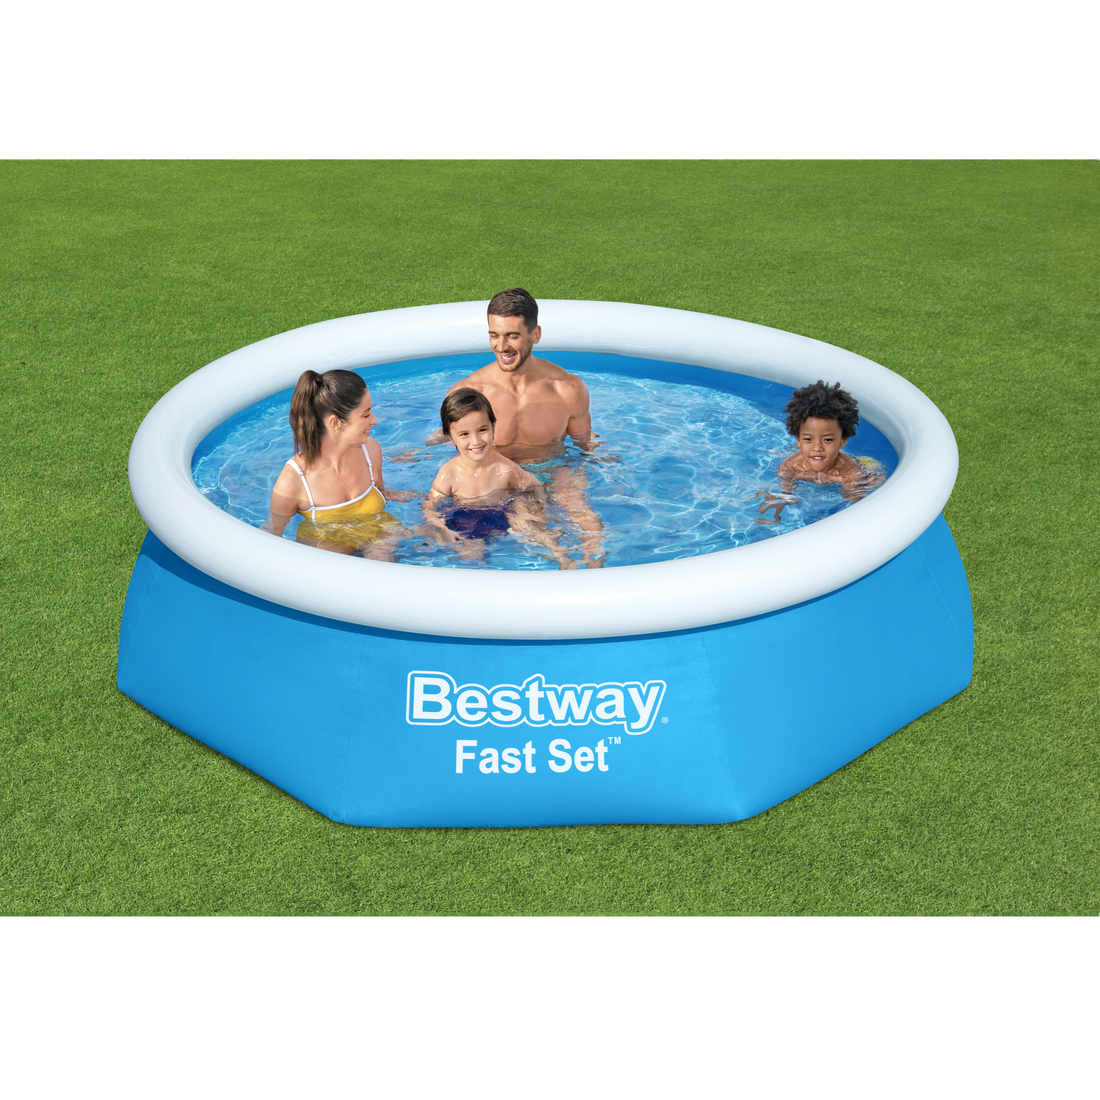 FREESTANDING POOL 2.44MX61CM WITHOUT FILTER - best price from Maltashopper.com BR500013727